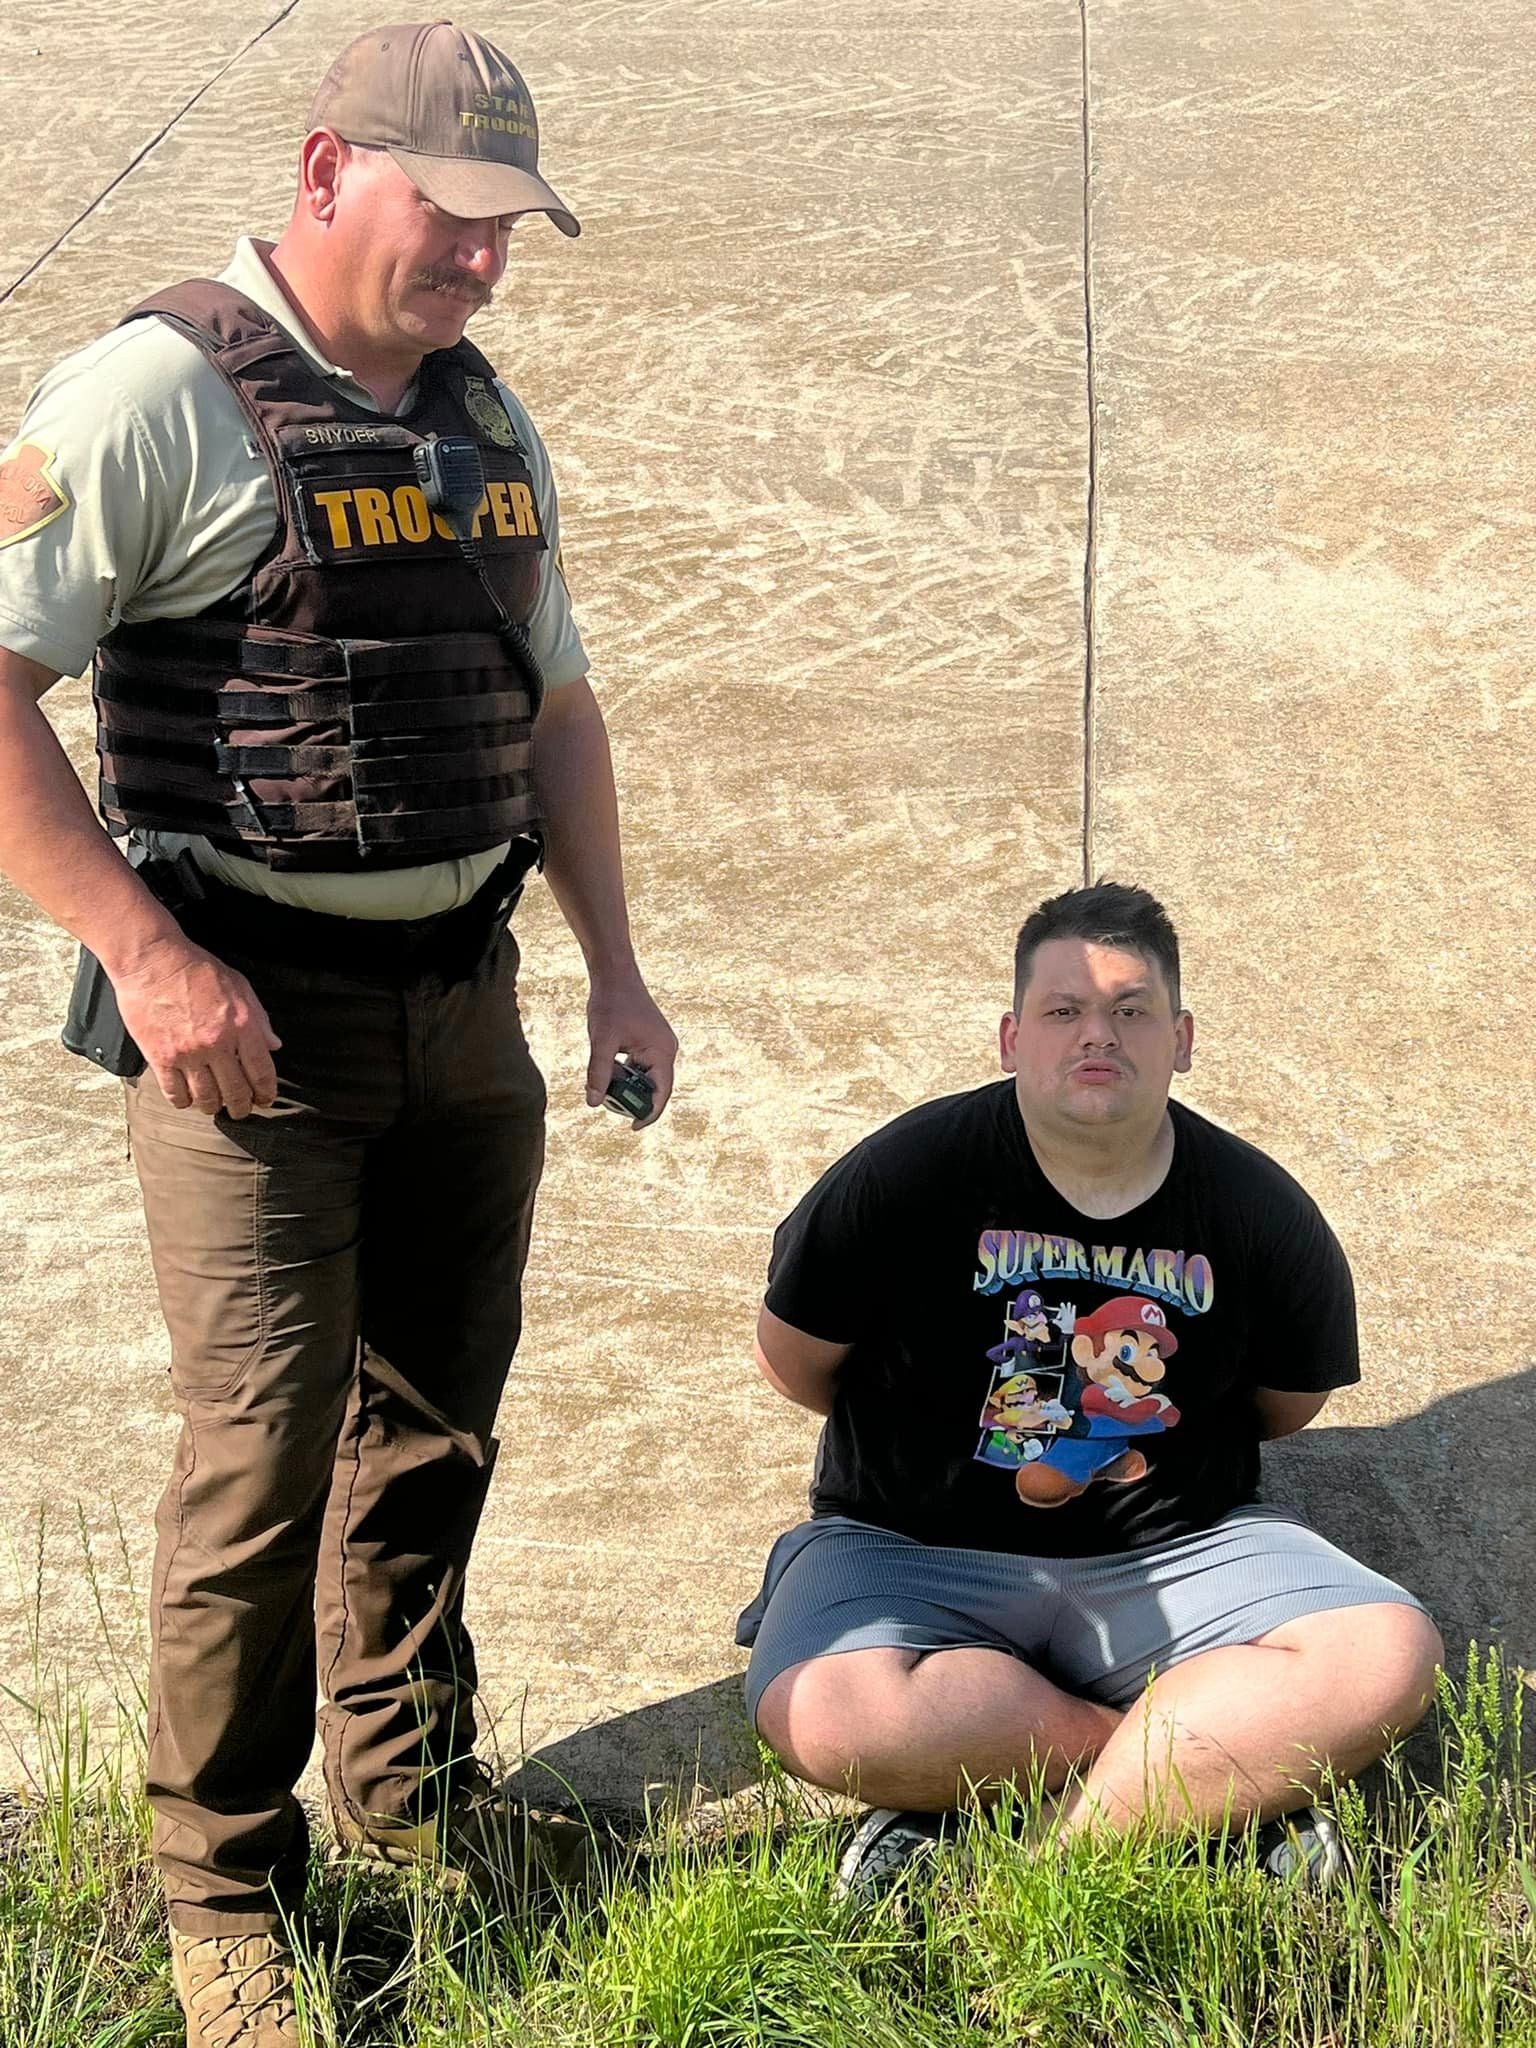 Trooper Matt Snyder from the Oklahoma Highway Patrol received Beck’s unprompted confession on the side of the highway